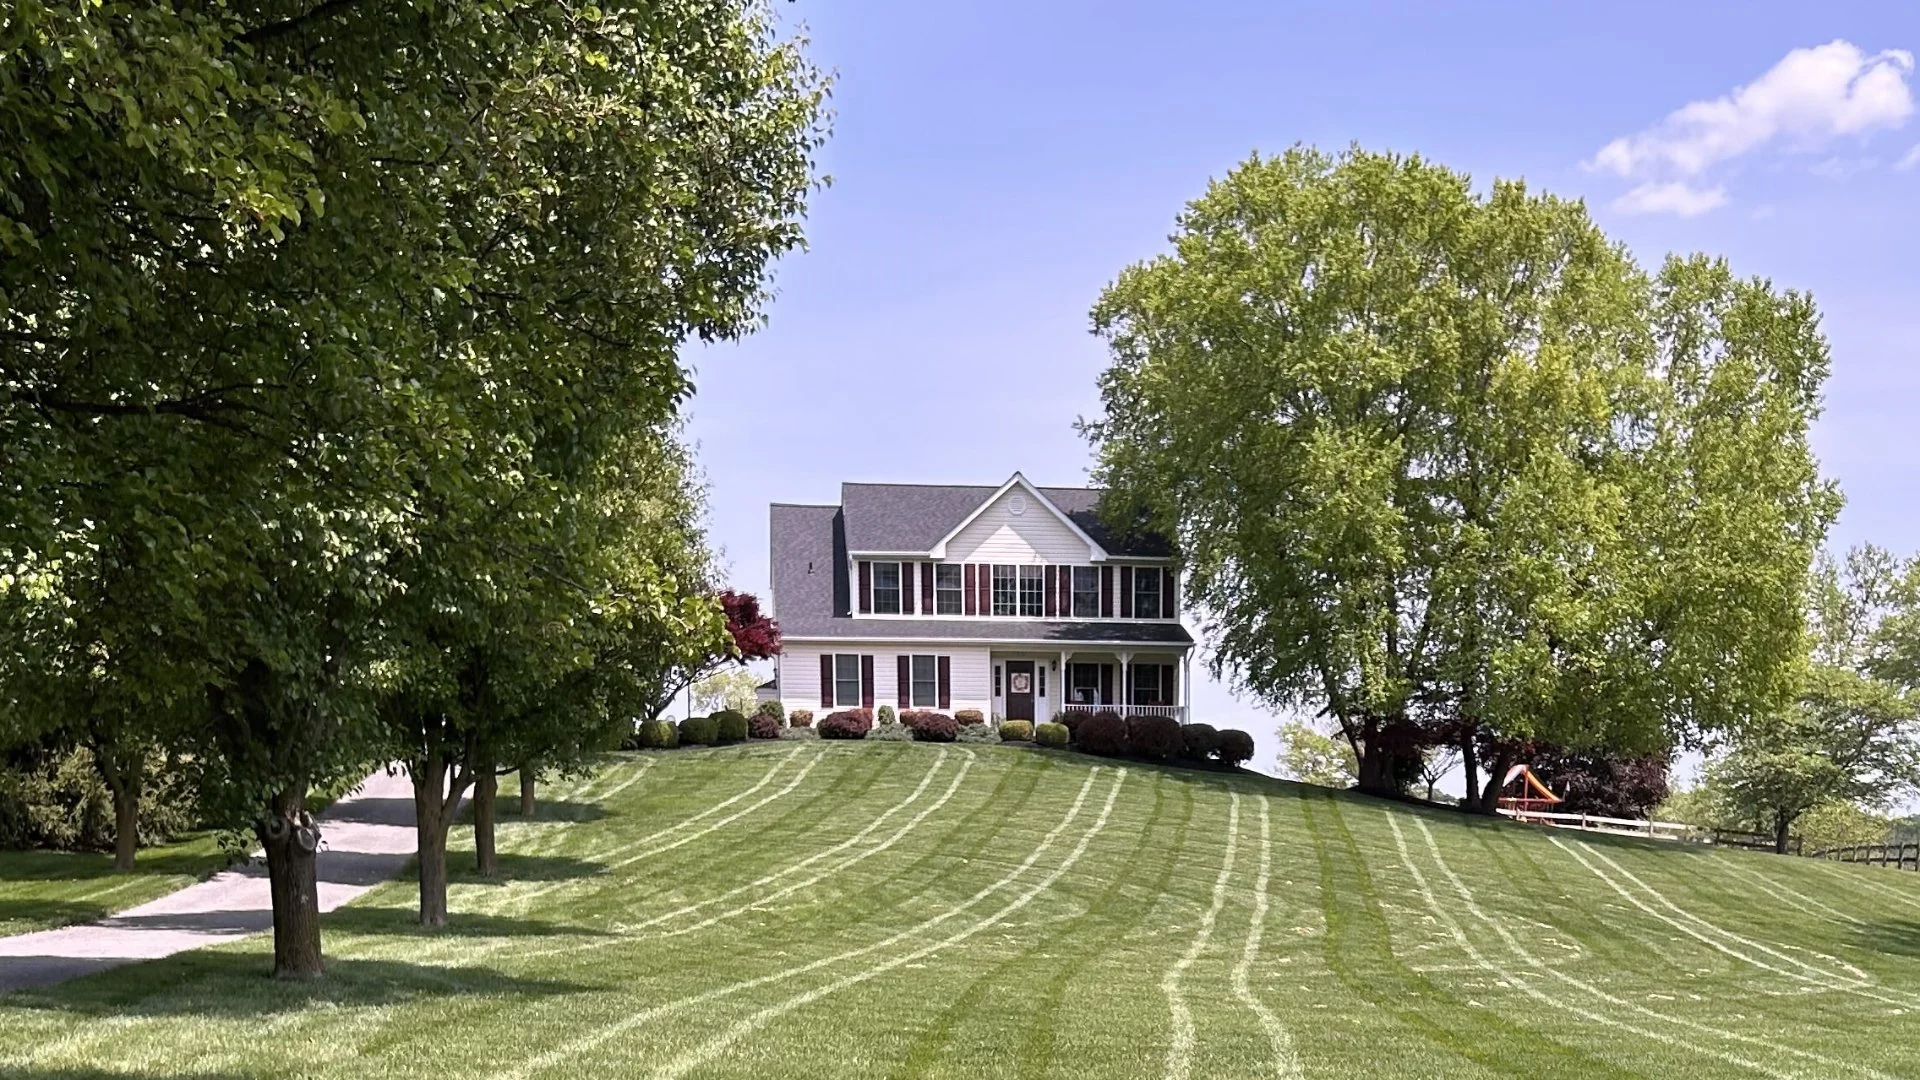 Home with trees and grass in Sykesville, MD.